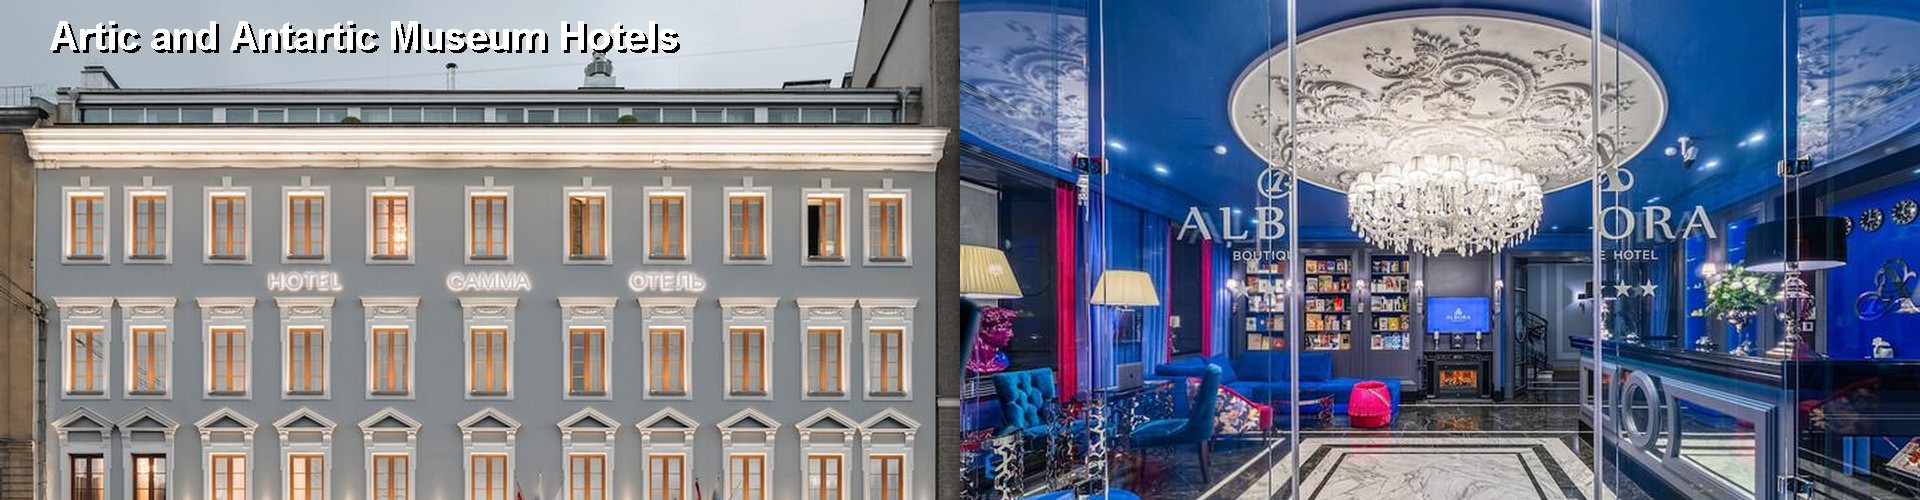 5 Best Hotels near Artic and Antartic Museum